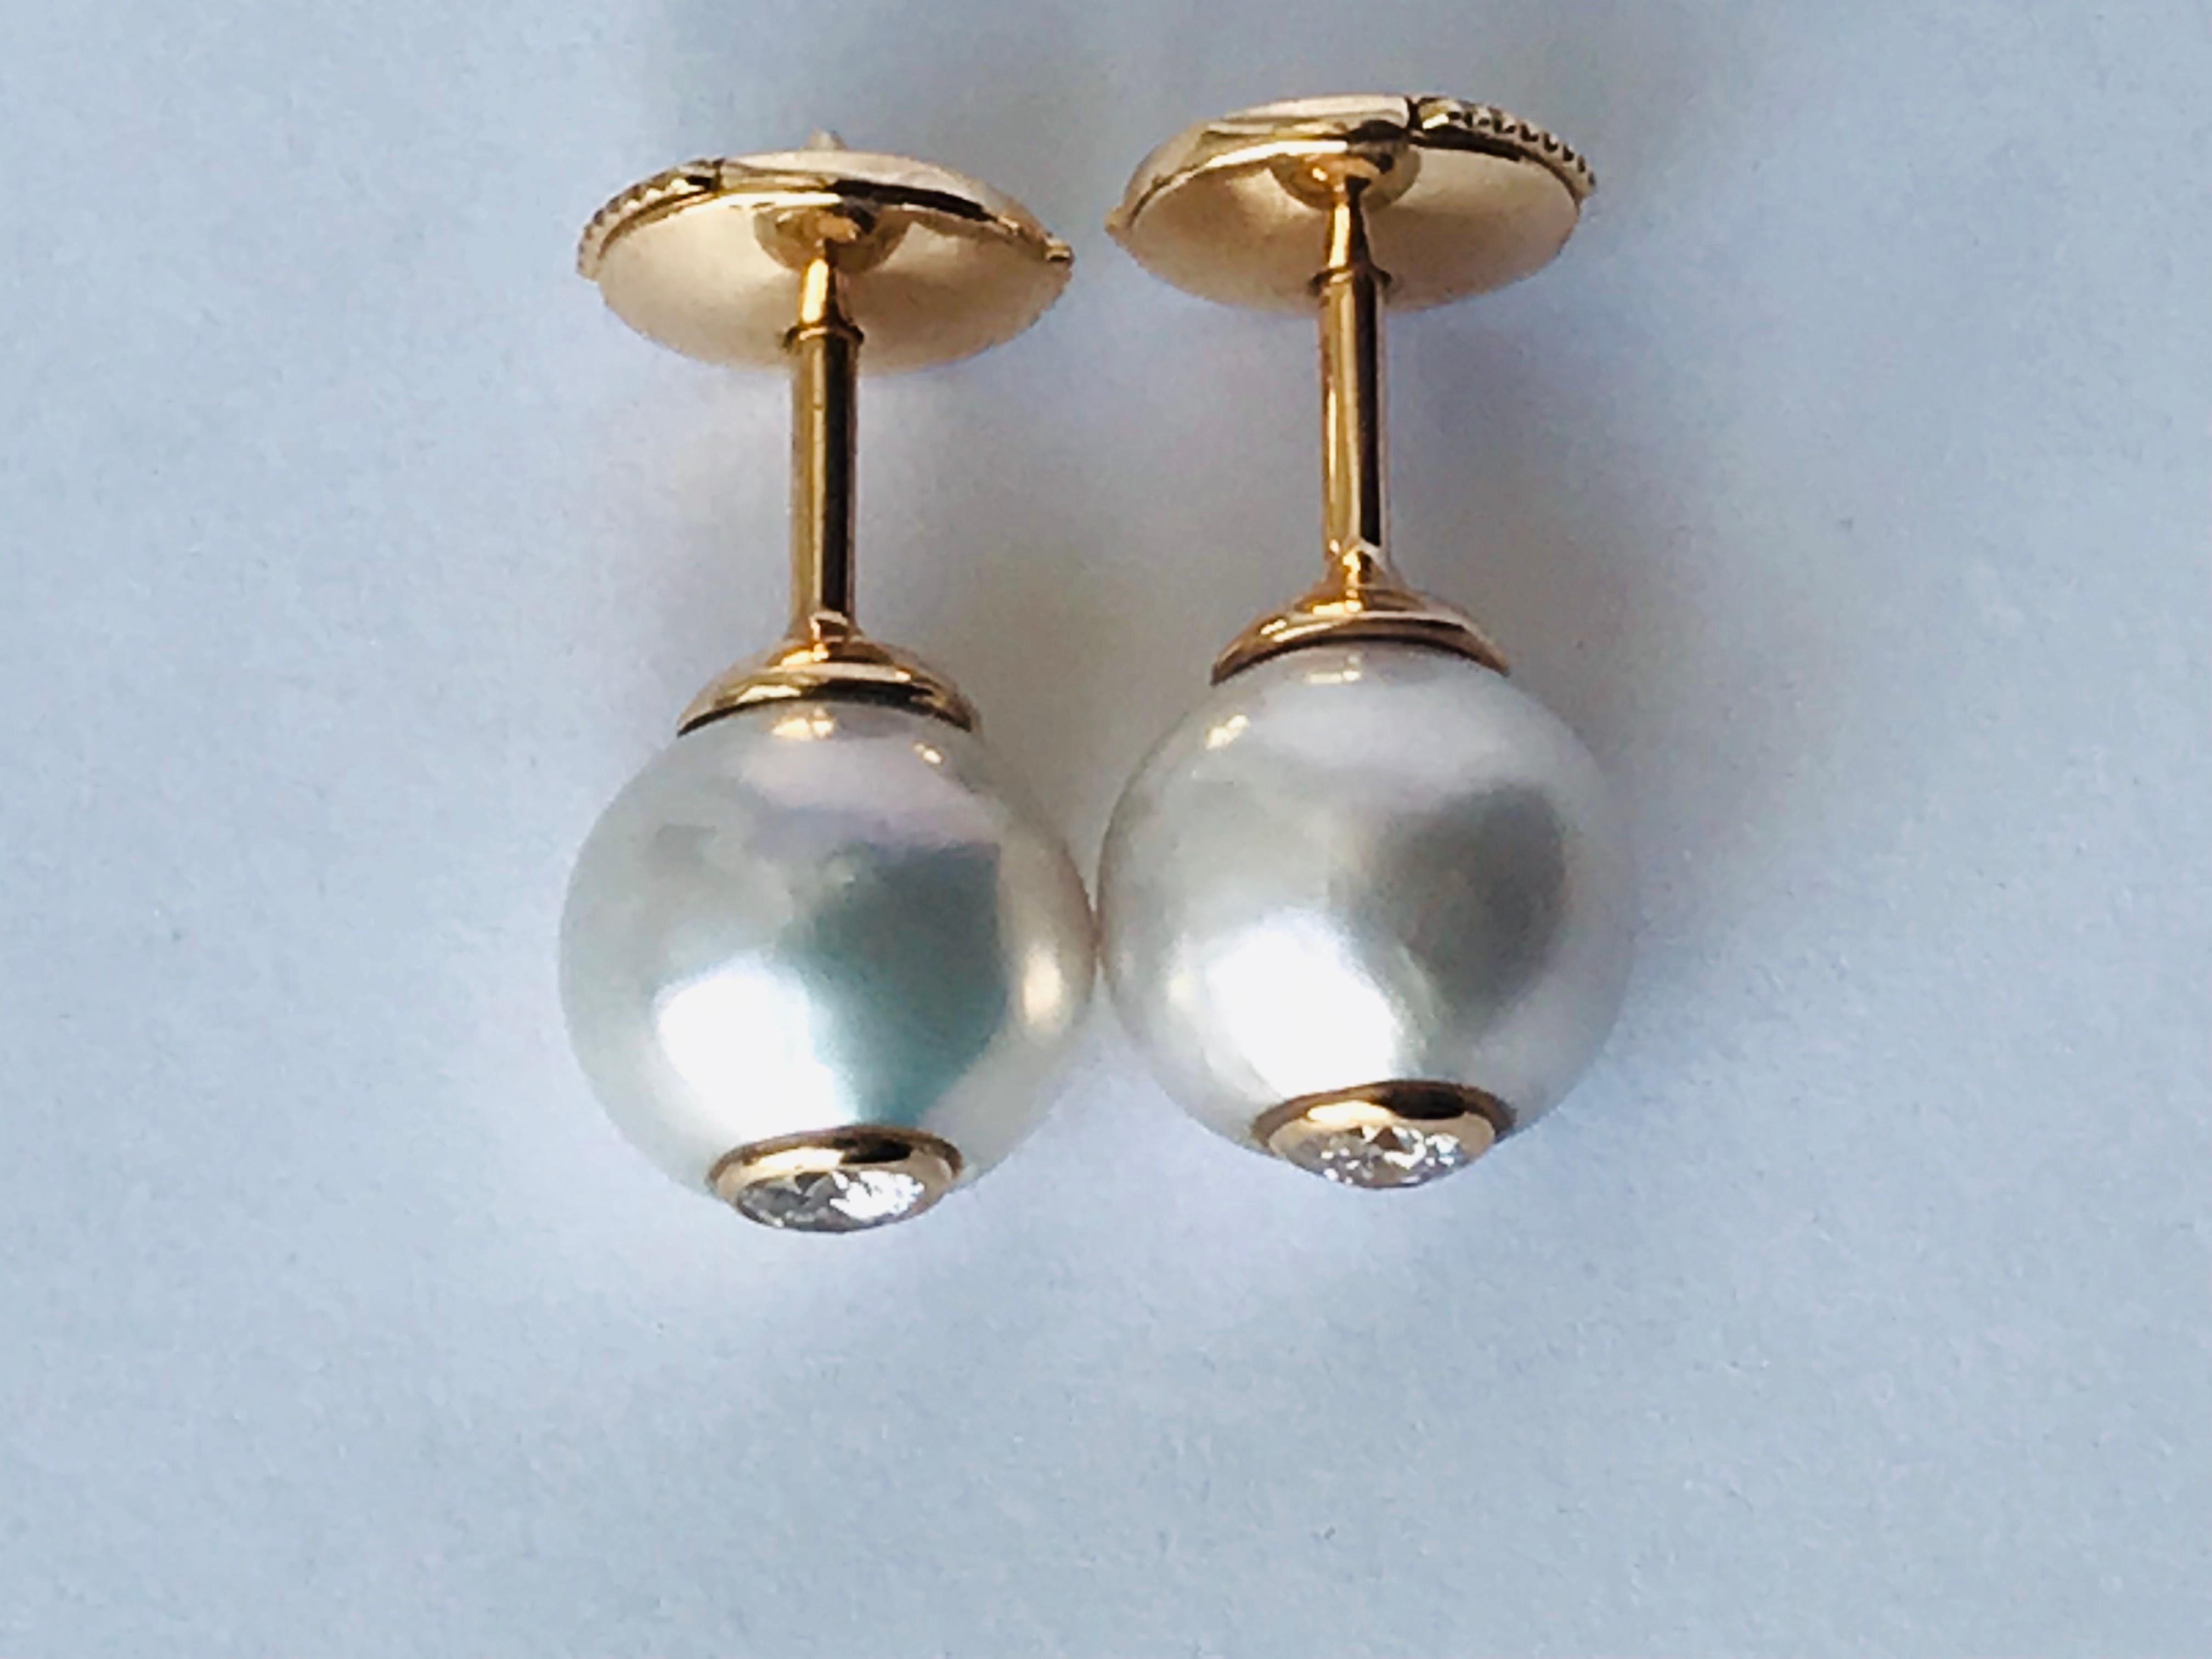 SÉLÉNÉ : 18K Rose gold, diamonds and pearls pair of stud earrings by Frederique Berman
Bearing the name of luminous and beautiful Greek goddess of full moon, the Séléné pearl stud earrings are the best makeup : they bring a drop of light on each